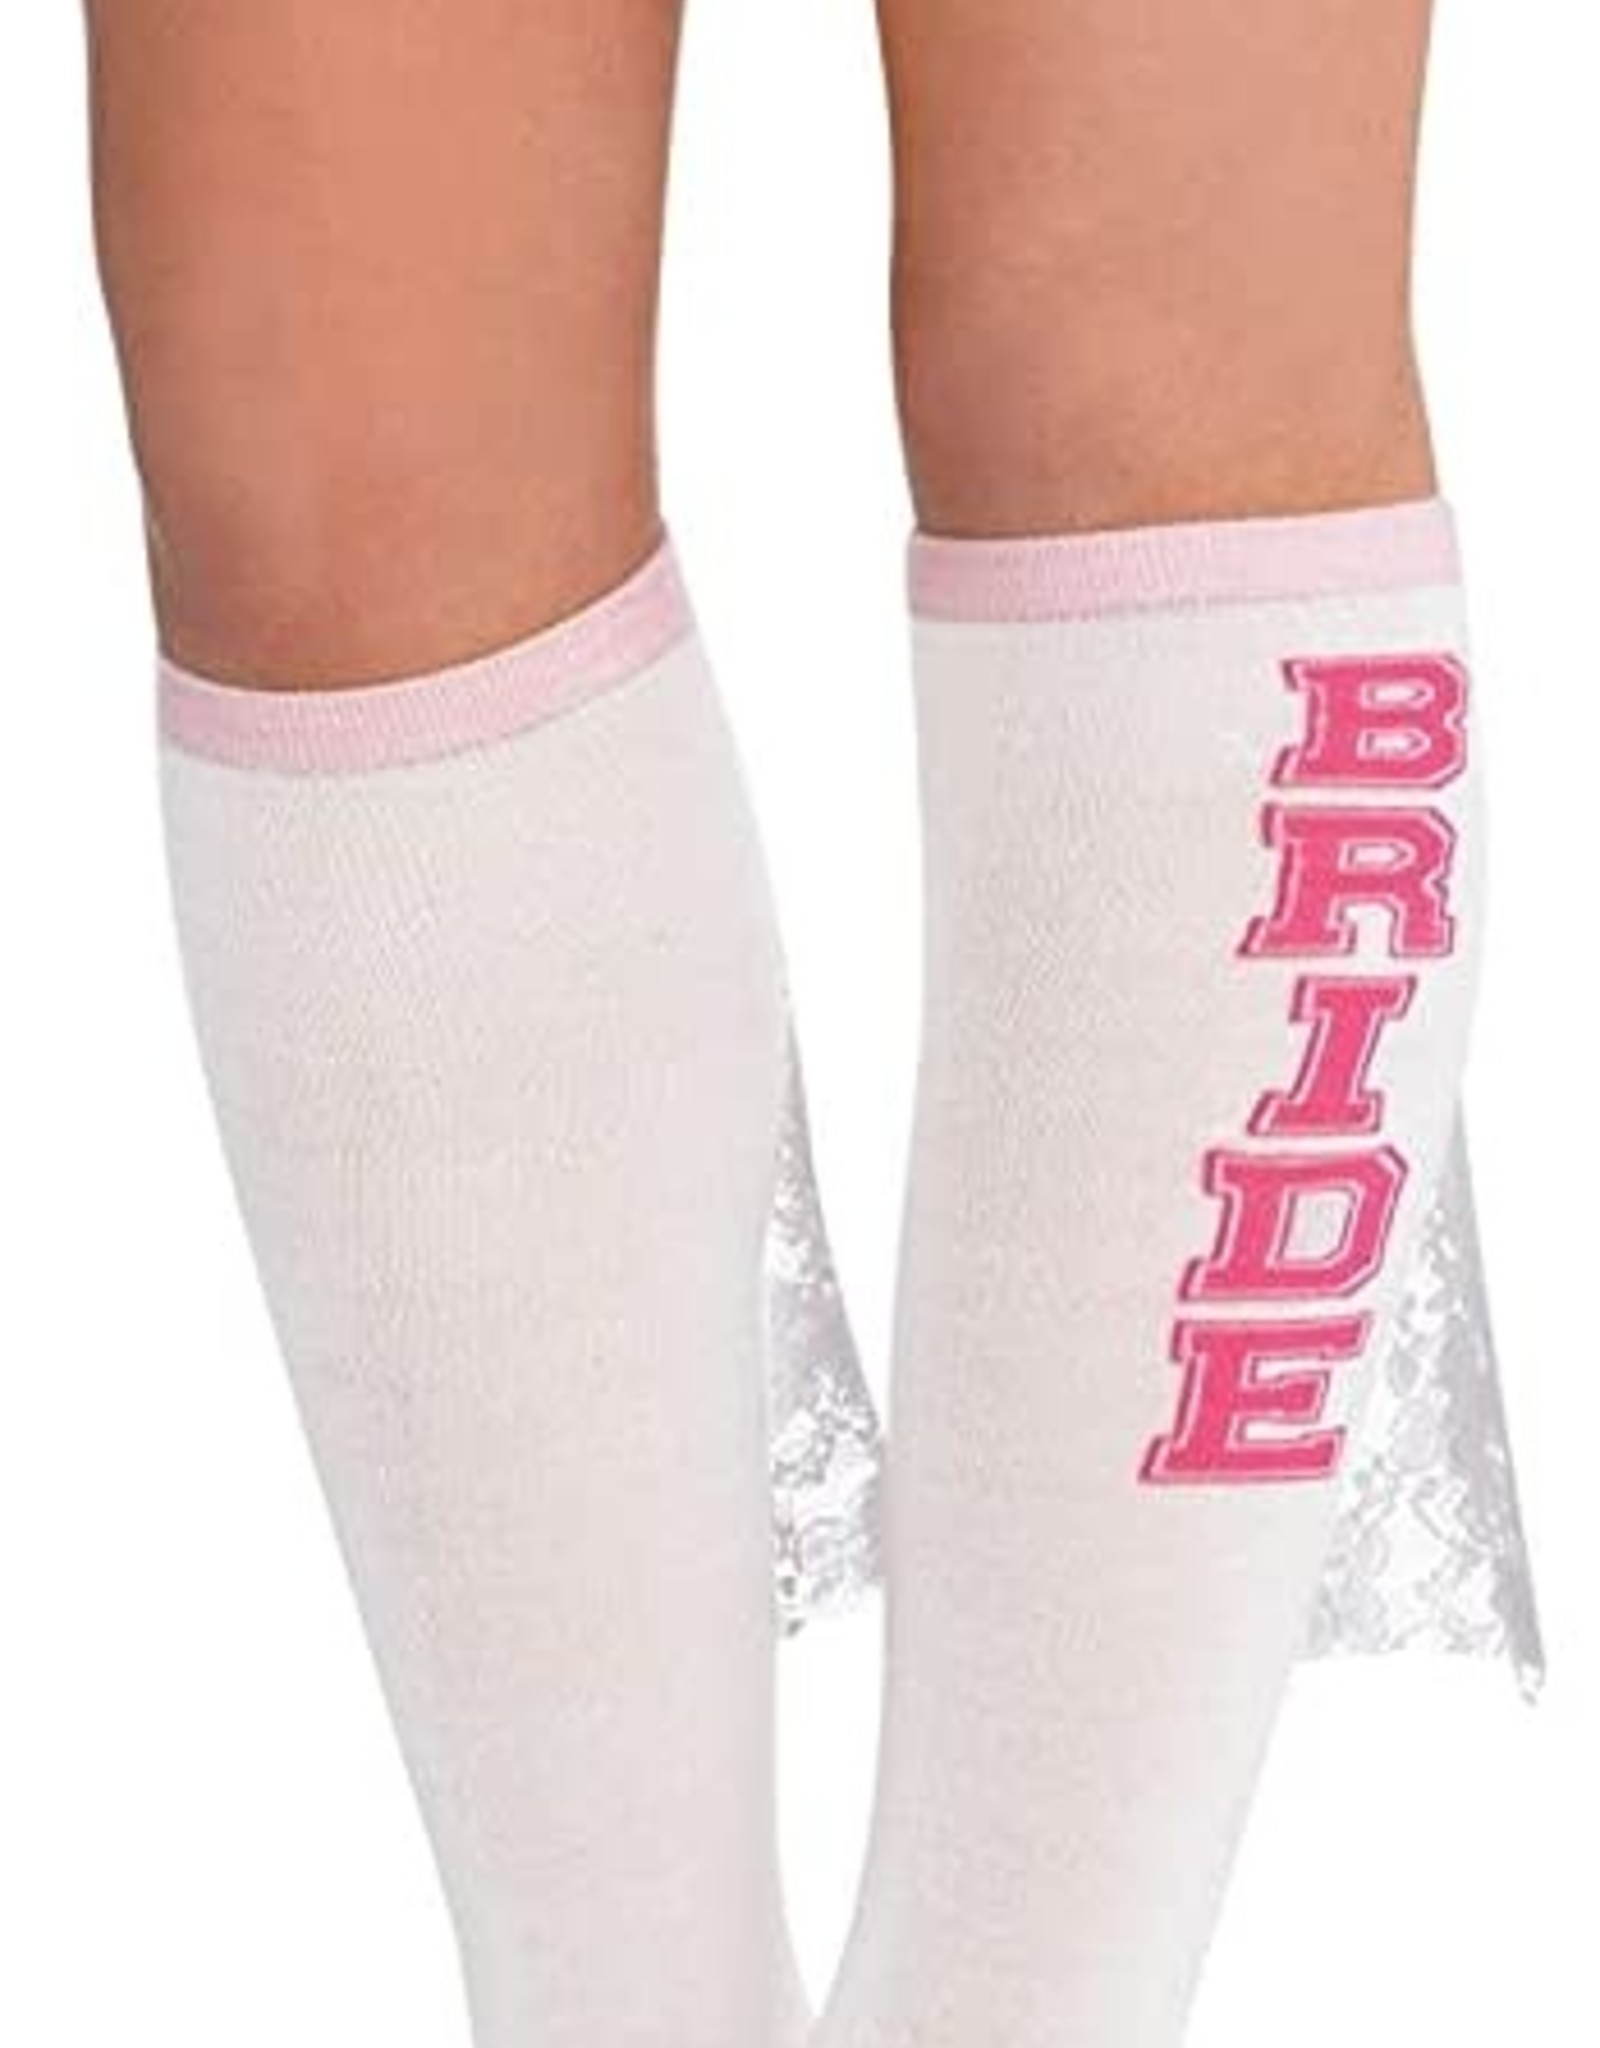 Wallys party factory Bride to Be Knee Socks - White